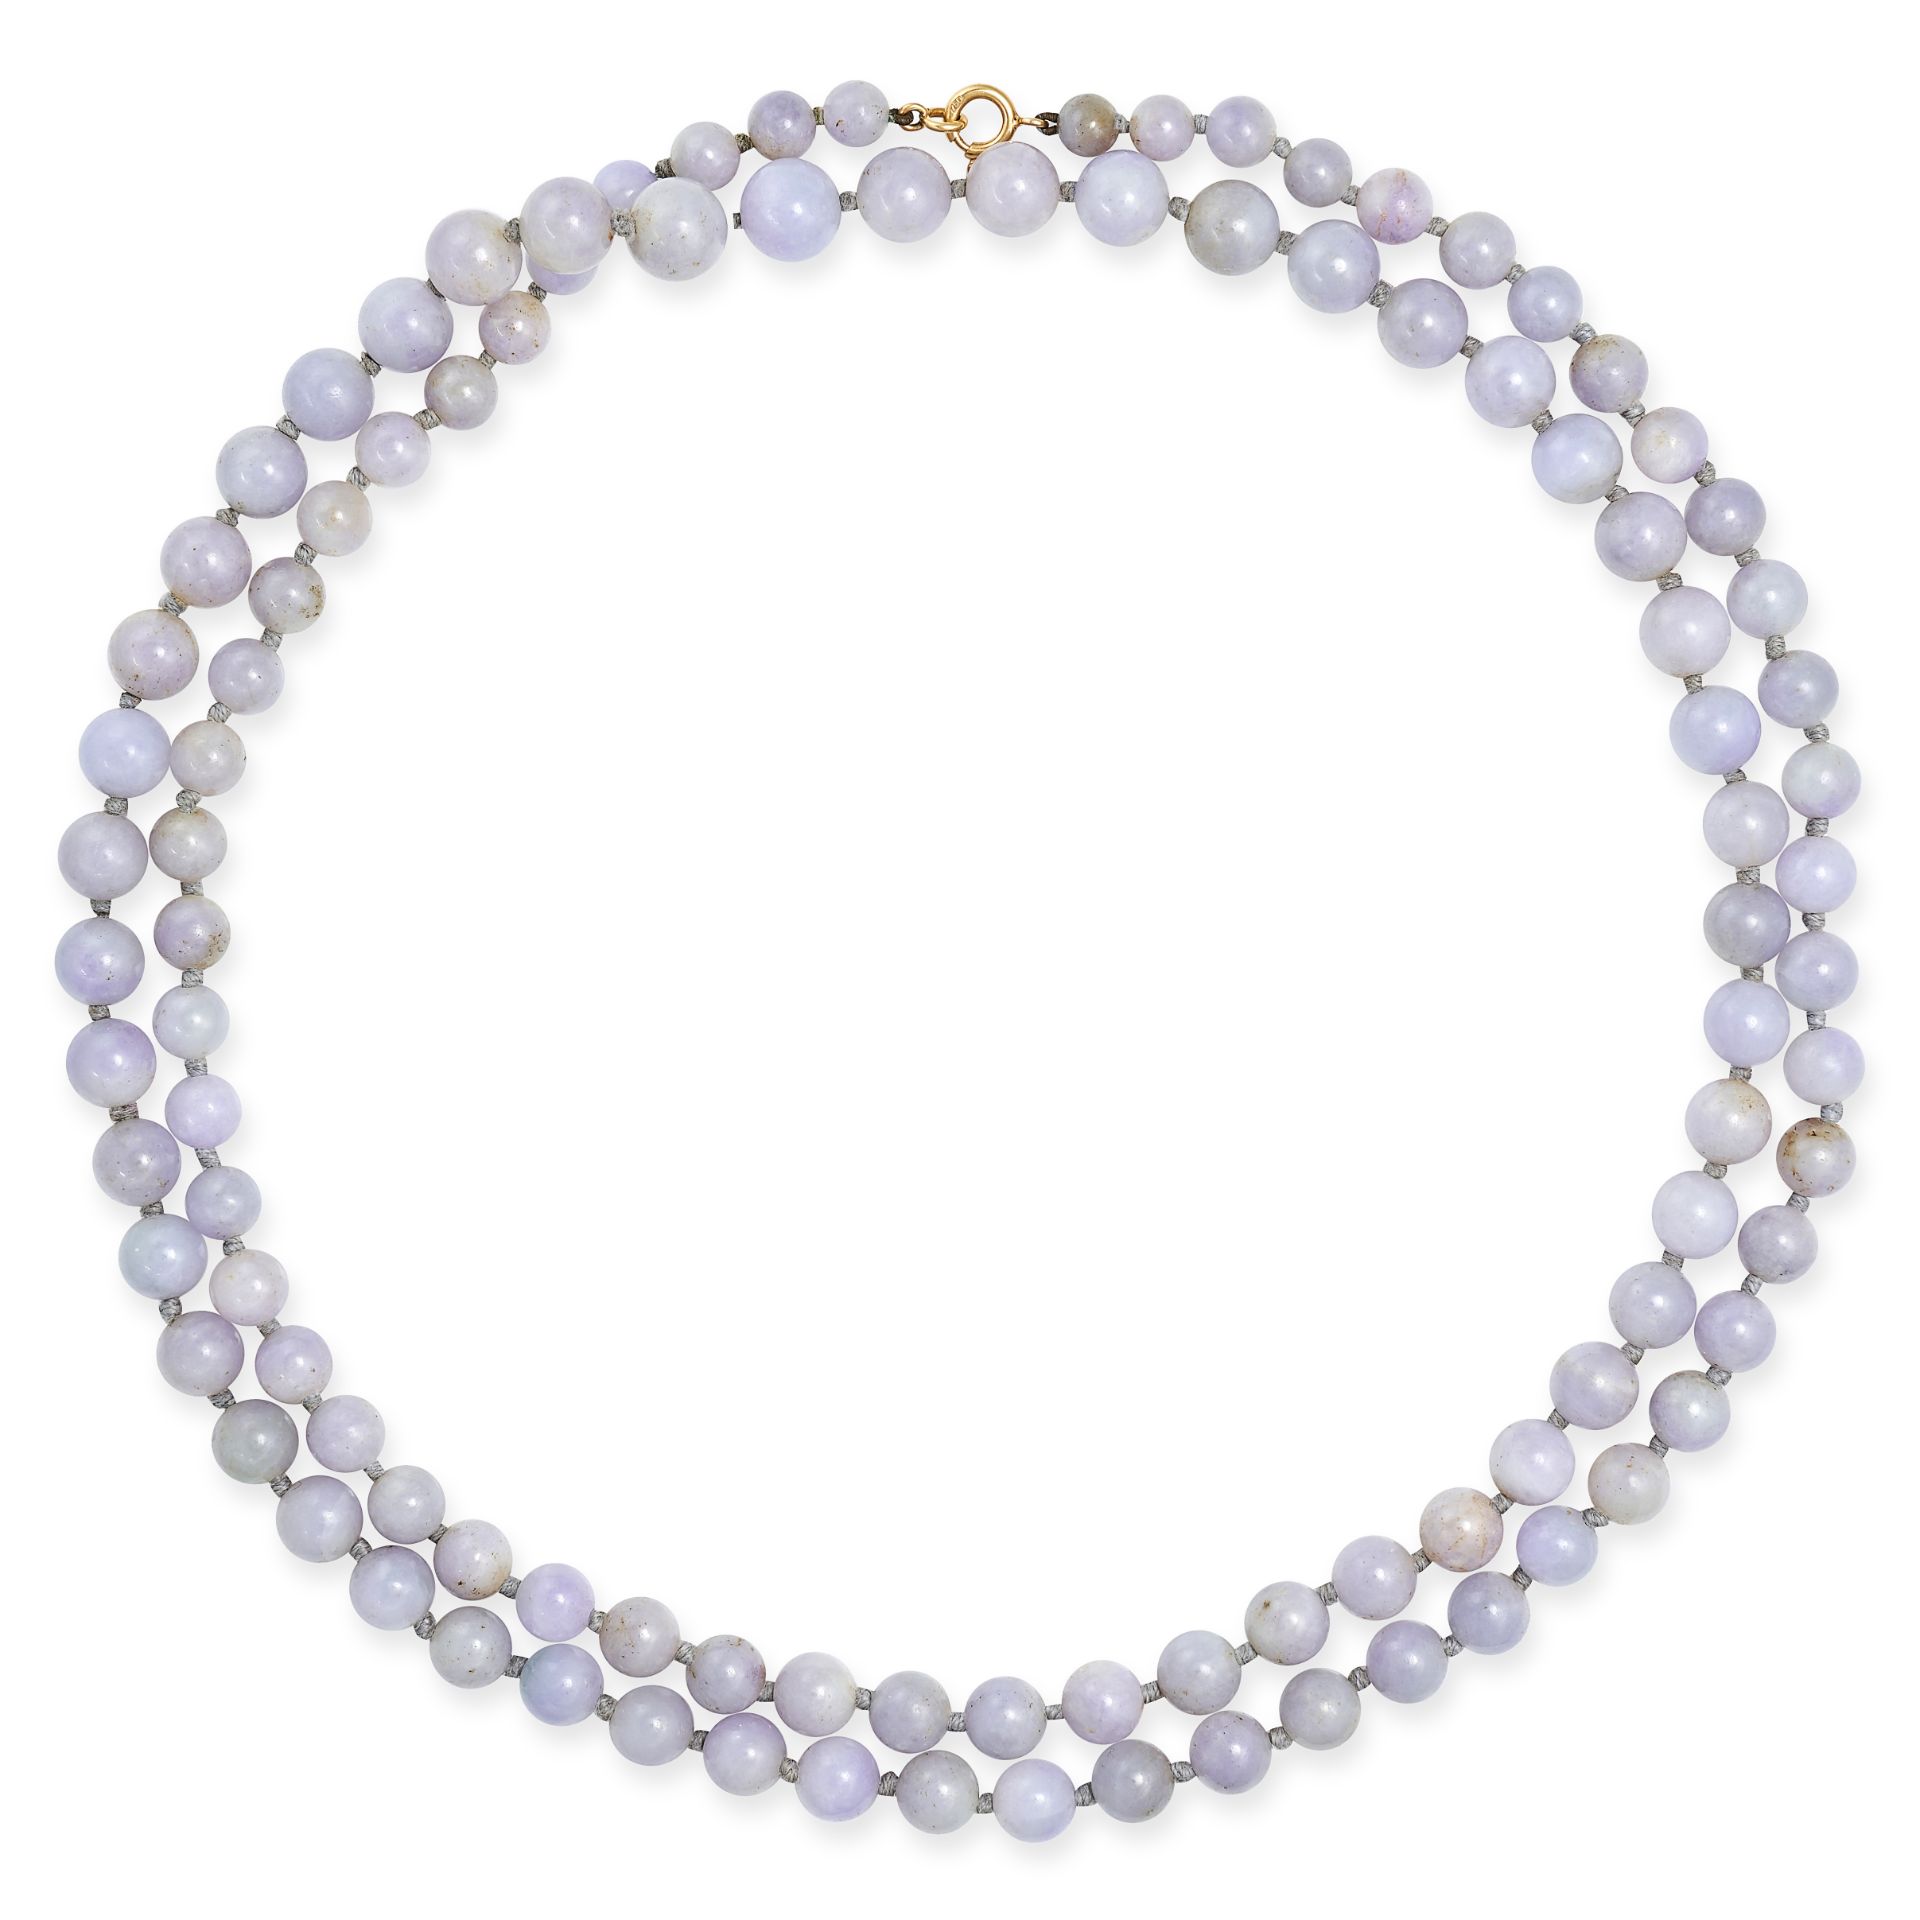 A LAVENDER JADEITE JADE BEAD NECKLACE in 18ct yellow gold, comprising a row of polished lavender ...